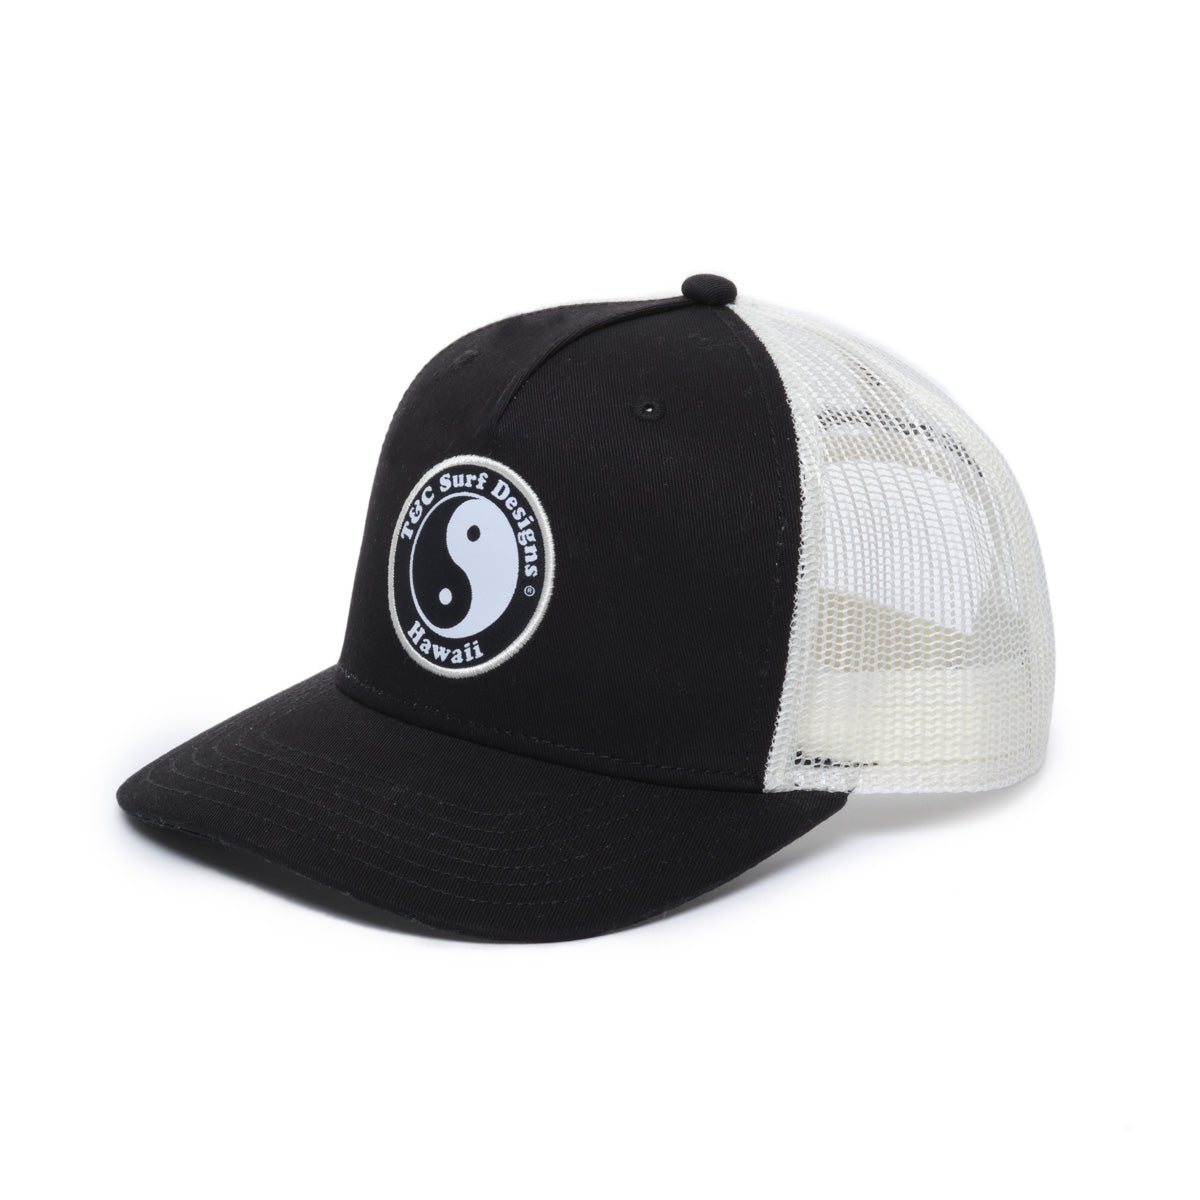 T&C Caps – Town & Country Surf Designs Europe